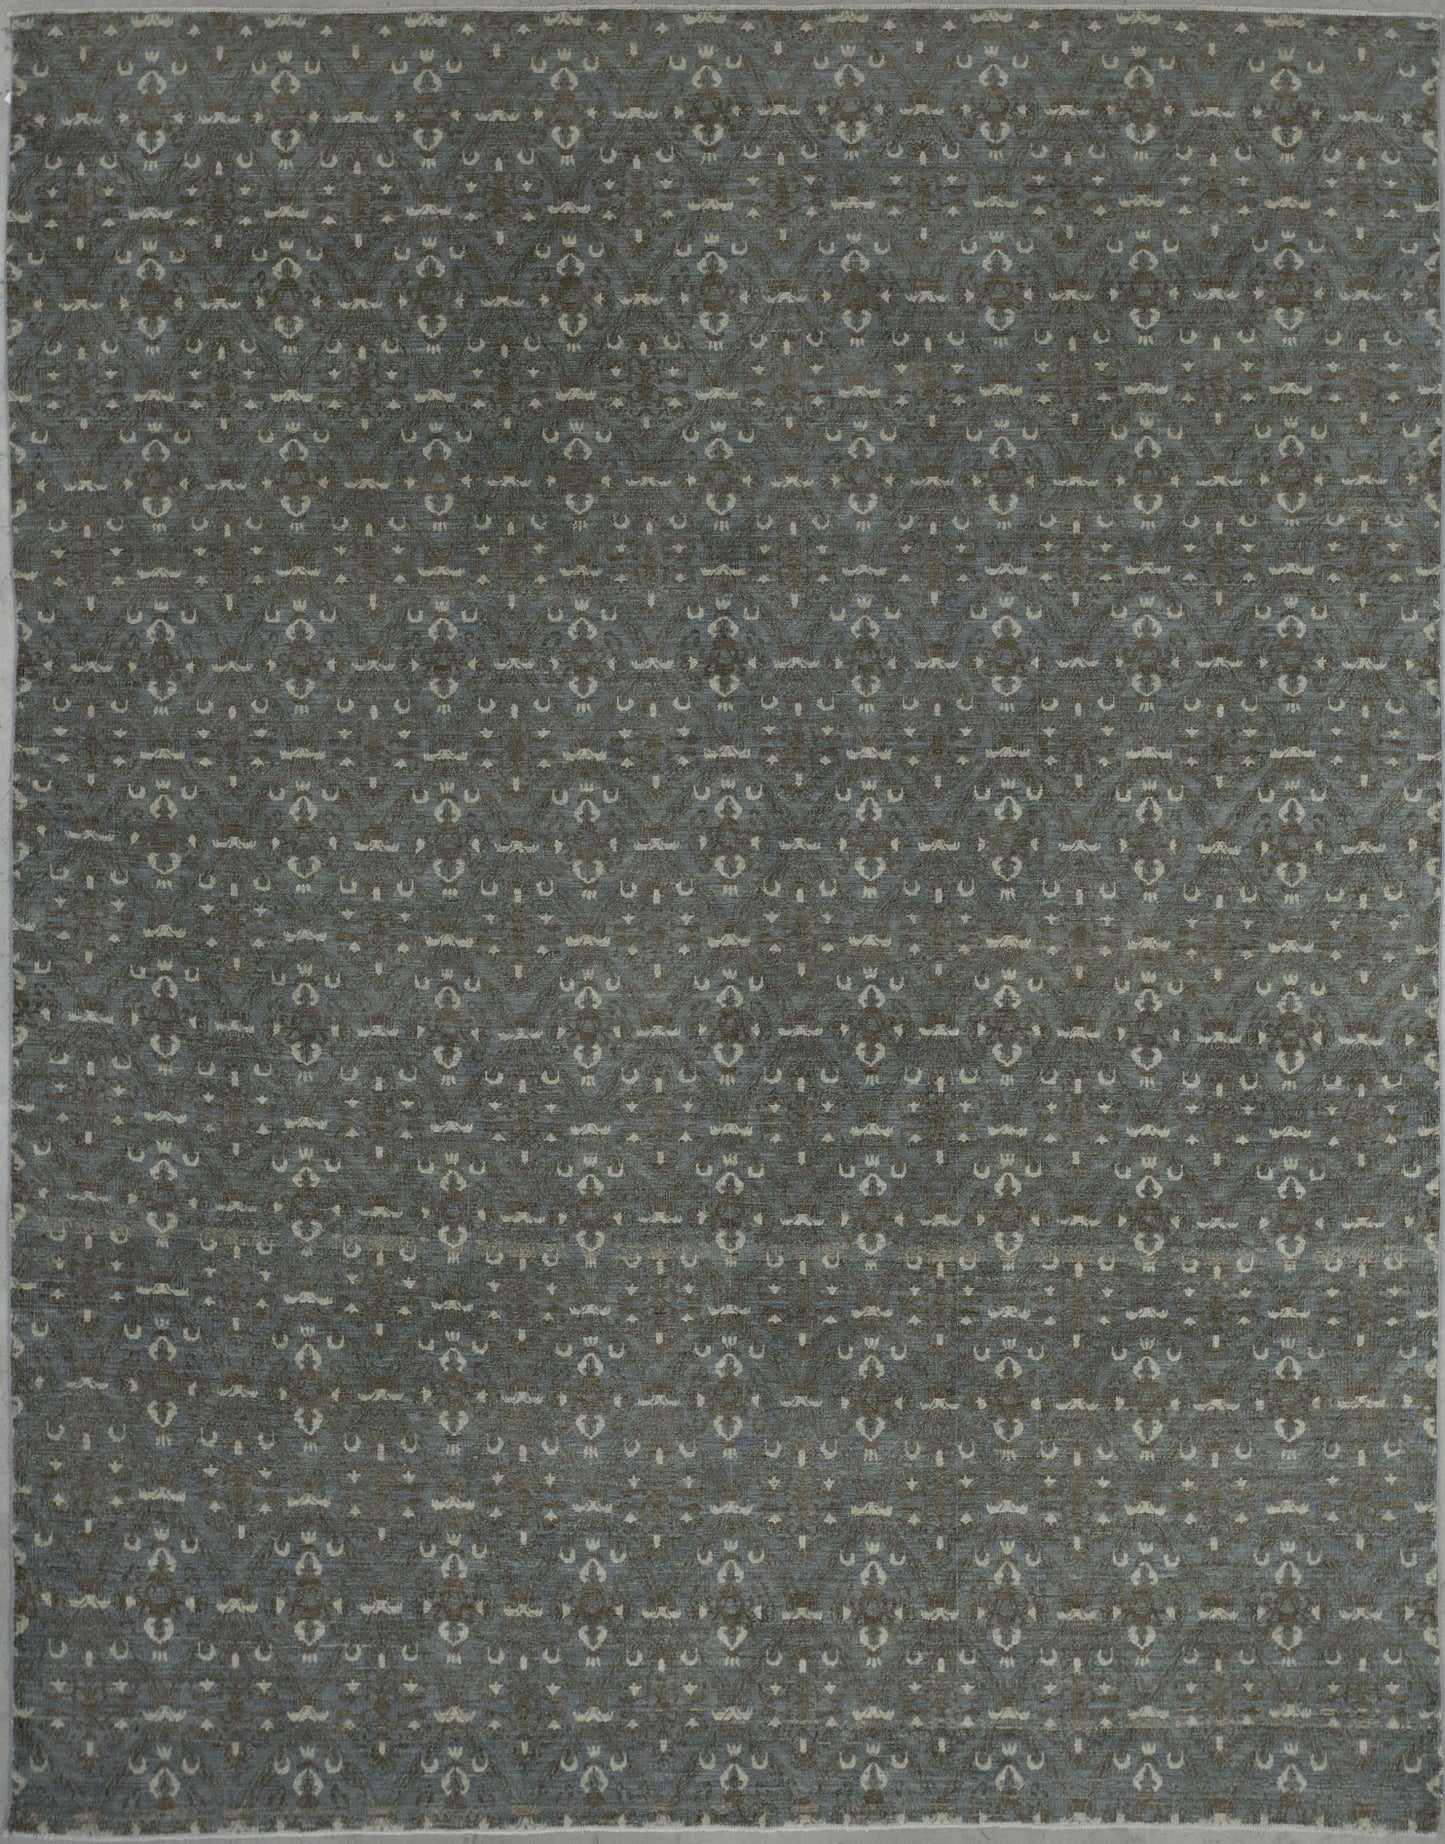 This posh carpet belongs to the bamyan collection. The color scheme has beige to represent candles in the pattern, copper for the candelabra lamp abstraction, and gray for the background.